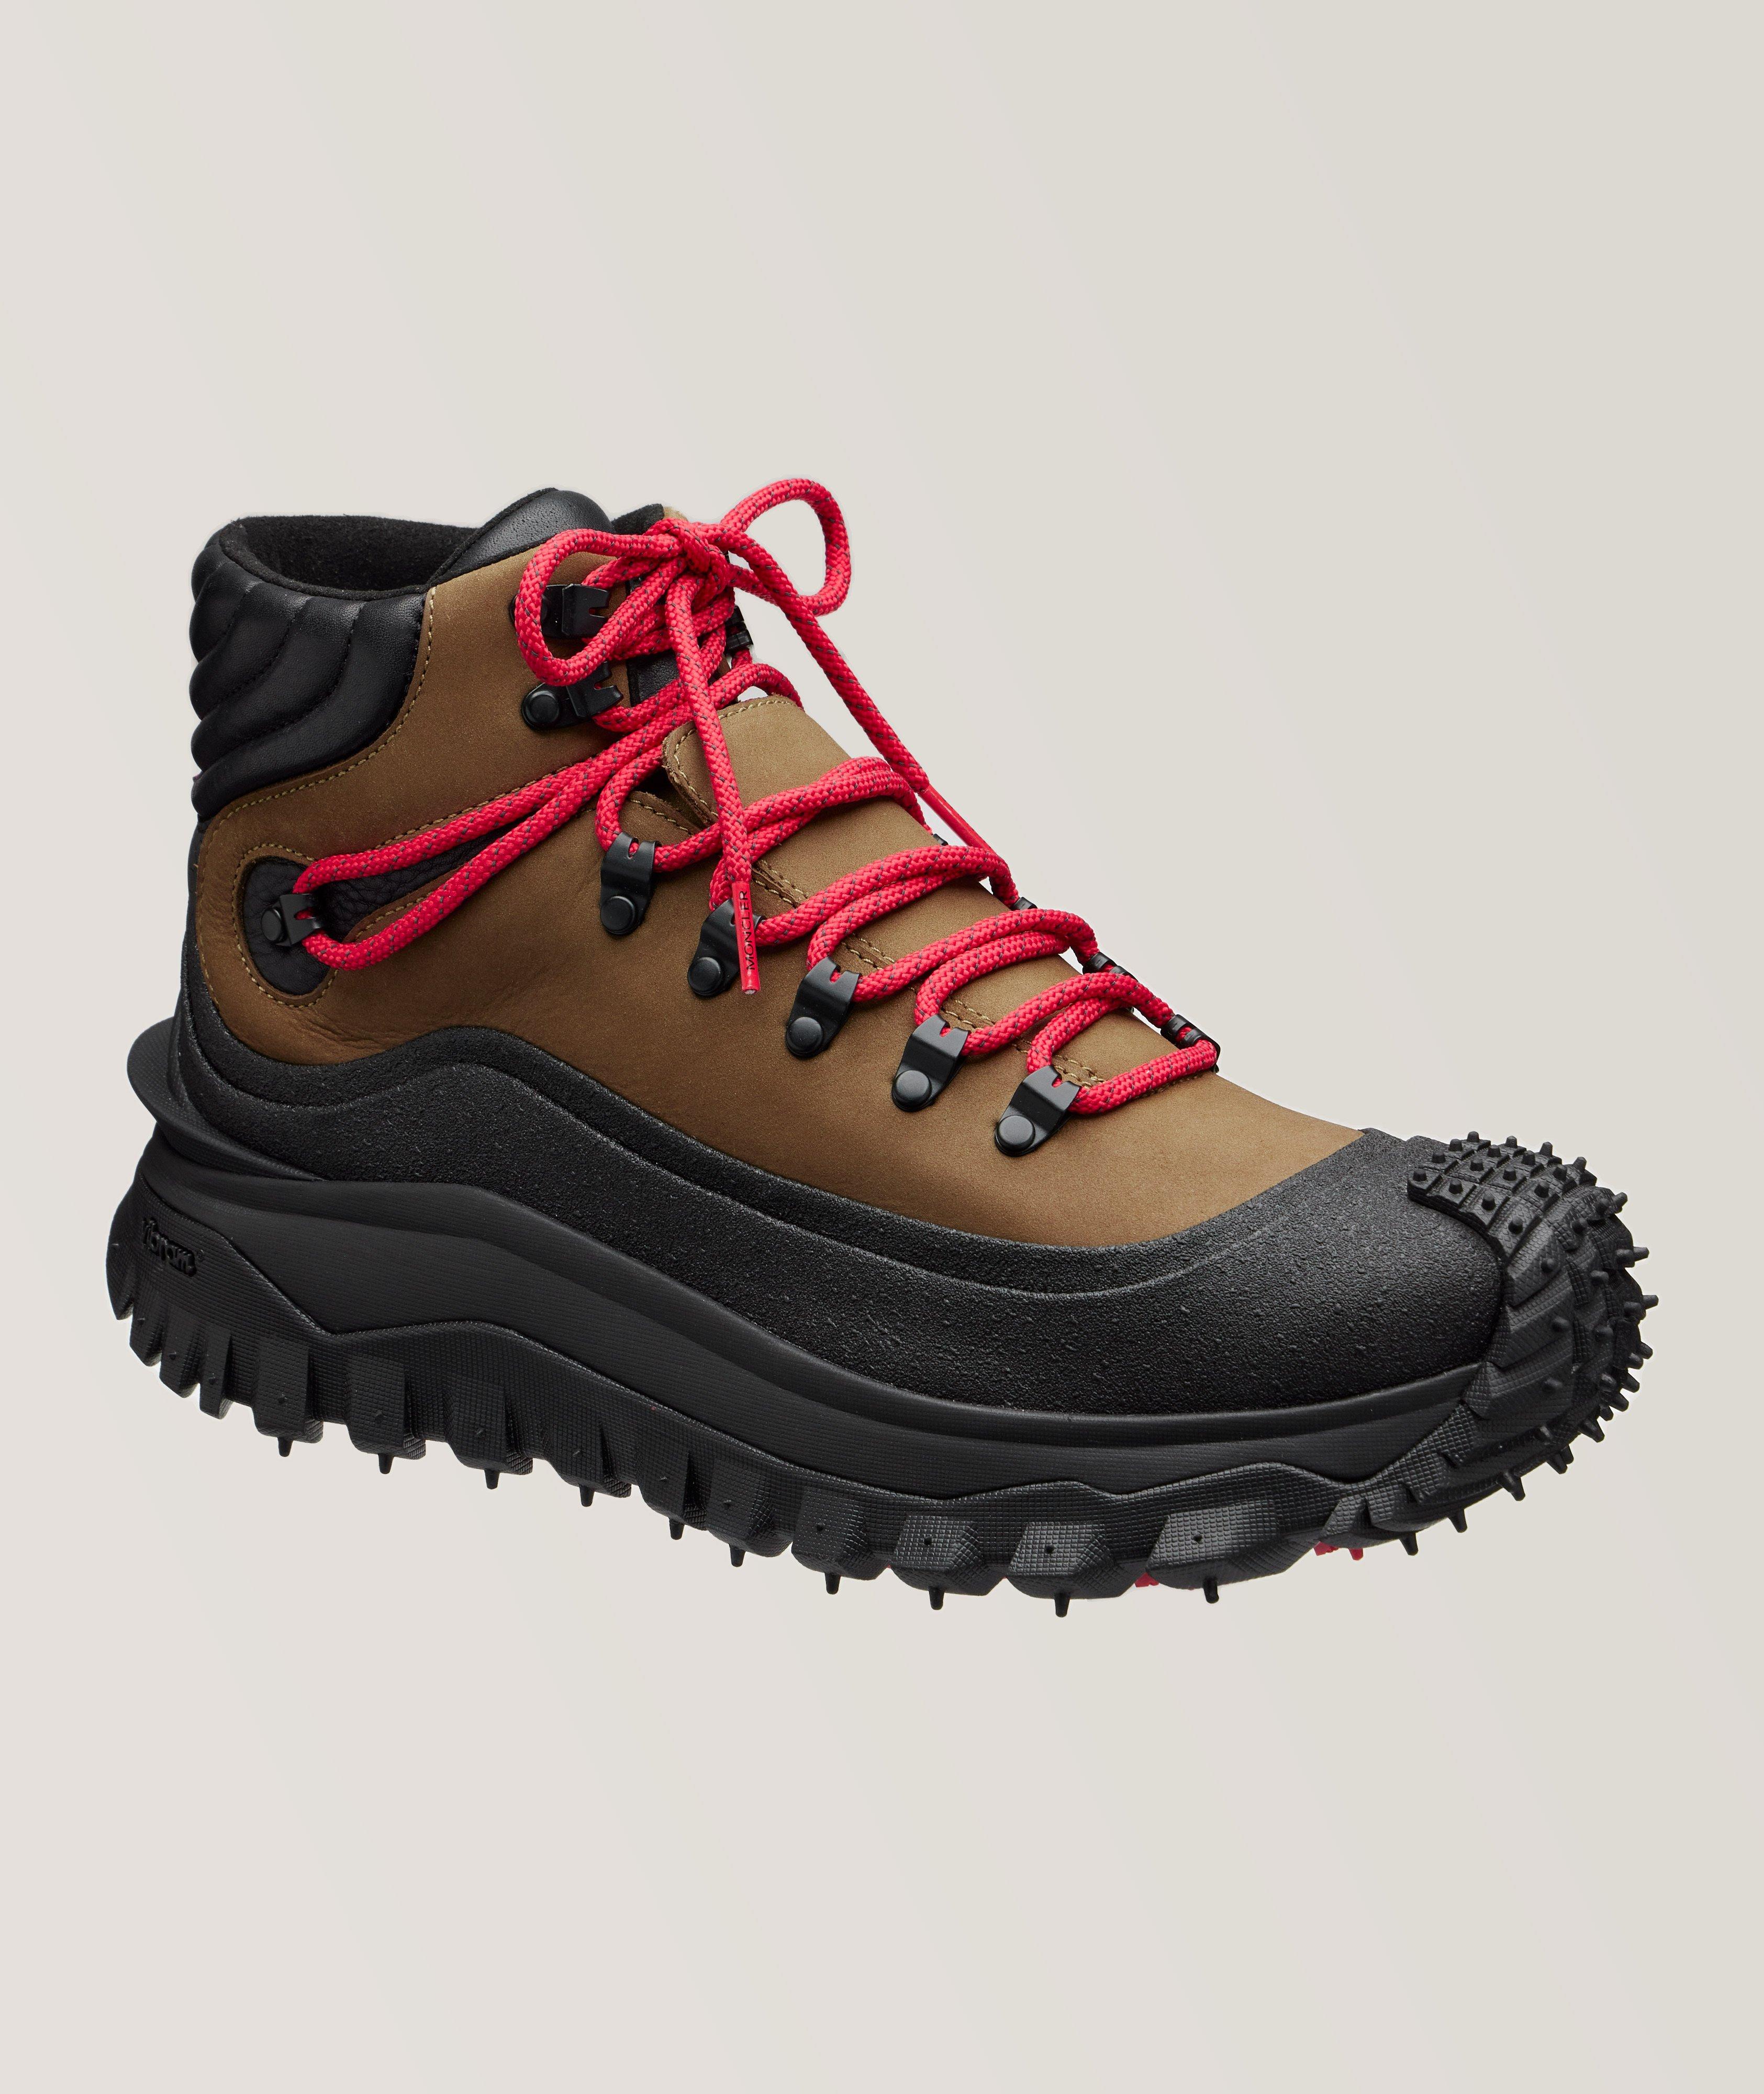 Trailgrip GTX Lace-Up Boots image 0